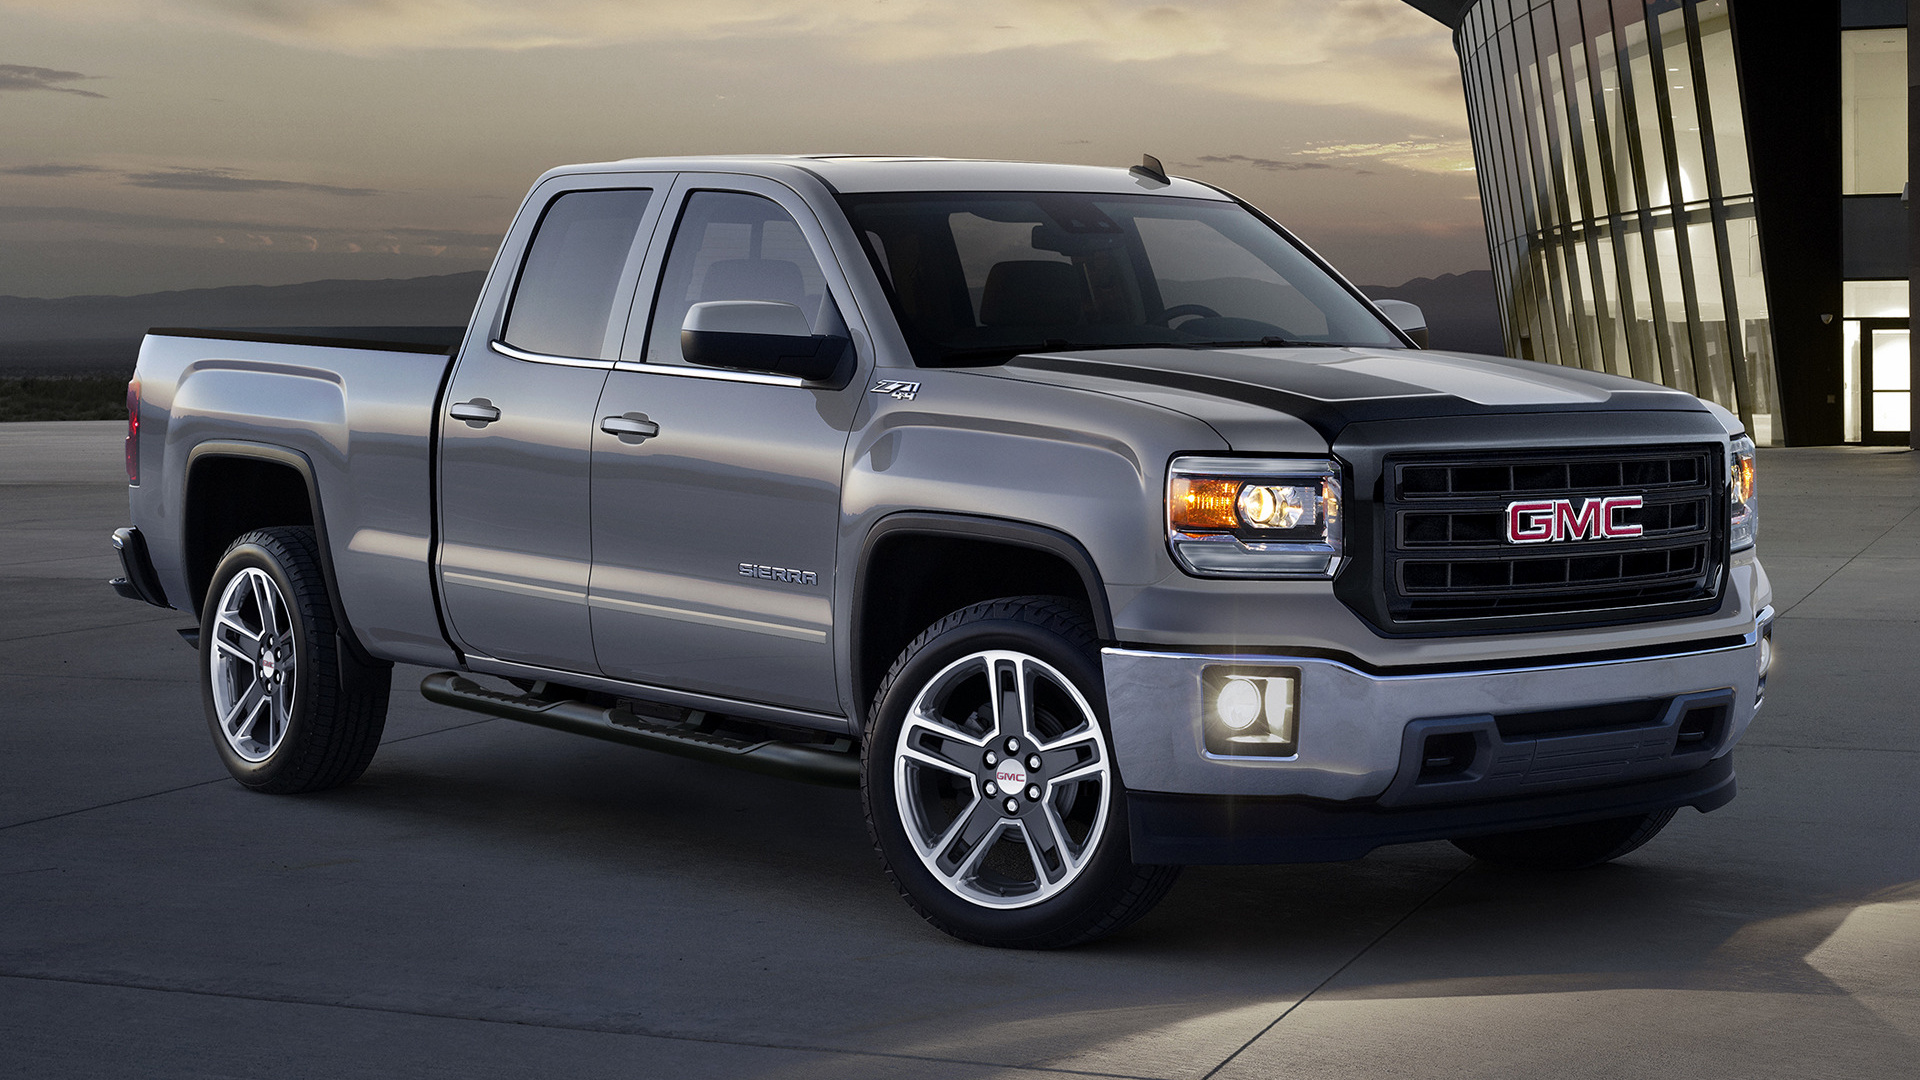 Gmc Sierra 1500 Sle Double Cab Carbon Edition 2015 Wallpapers And Hd